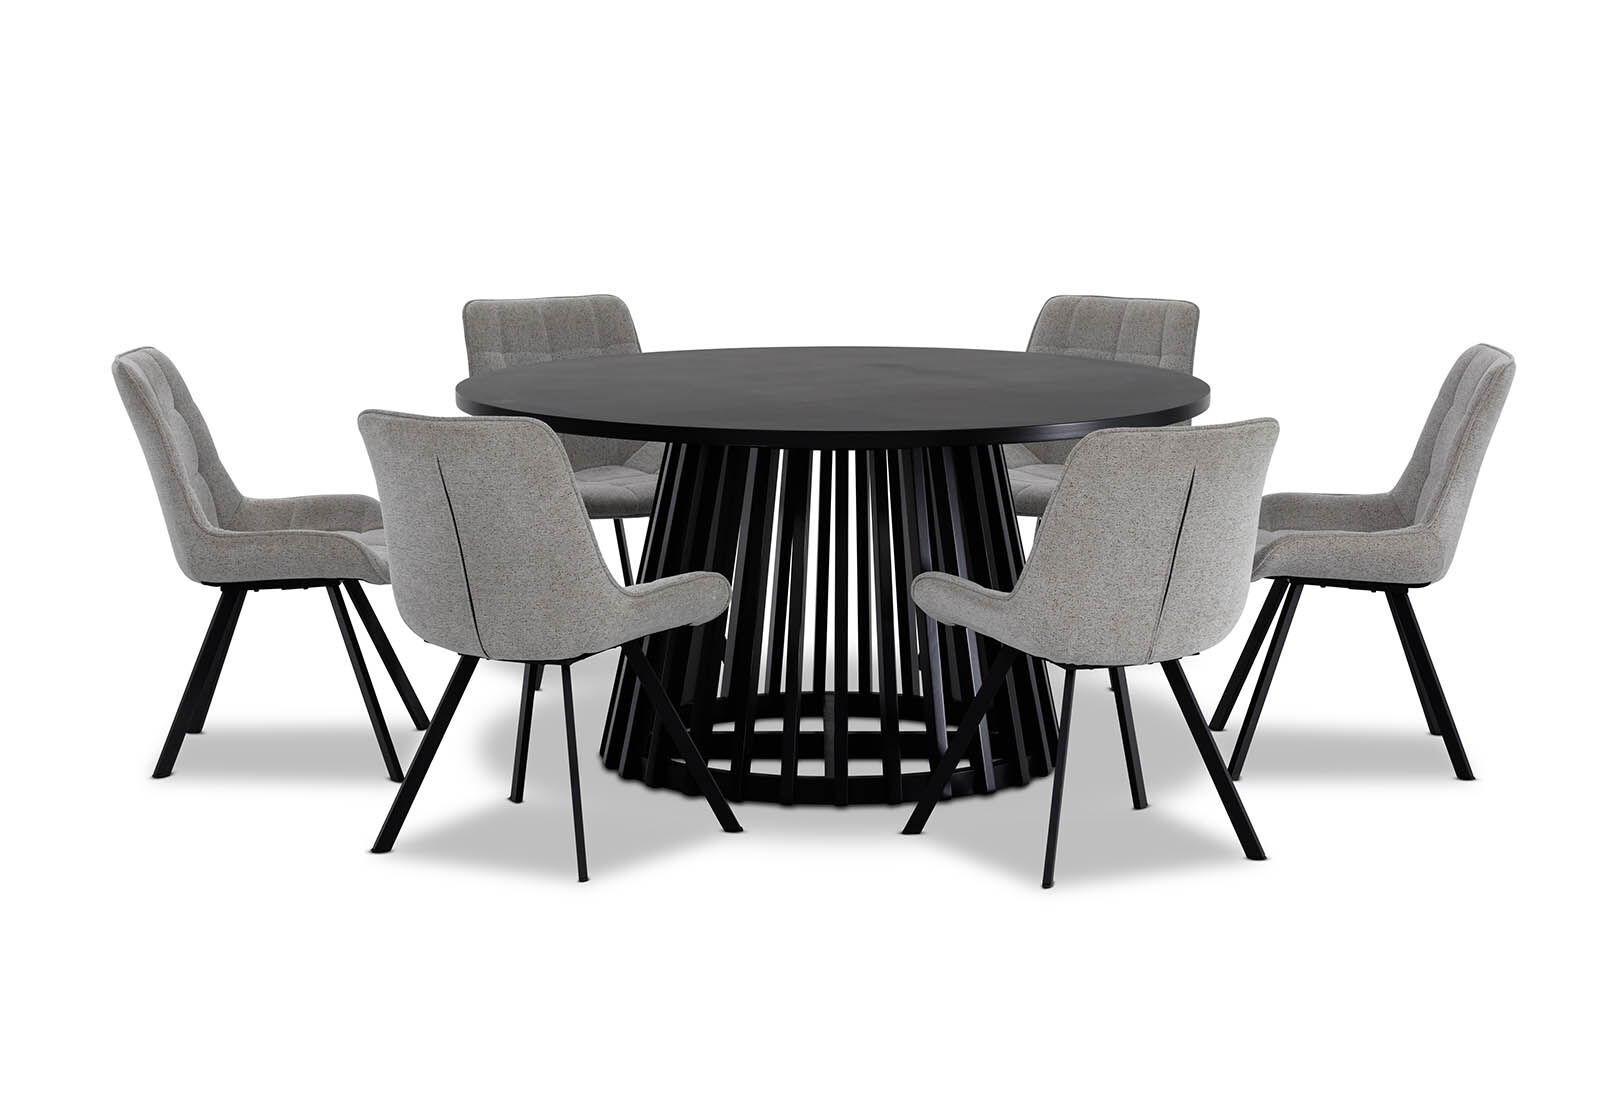 TORENTO 7 Piece Dining Suite with Arabella Chairs.